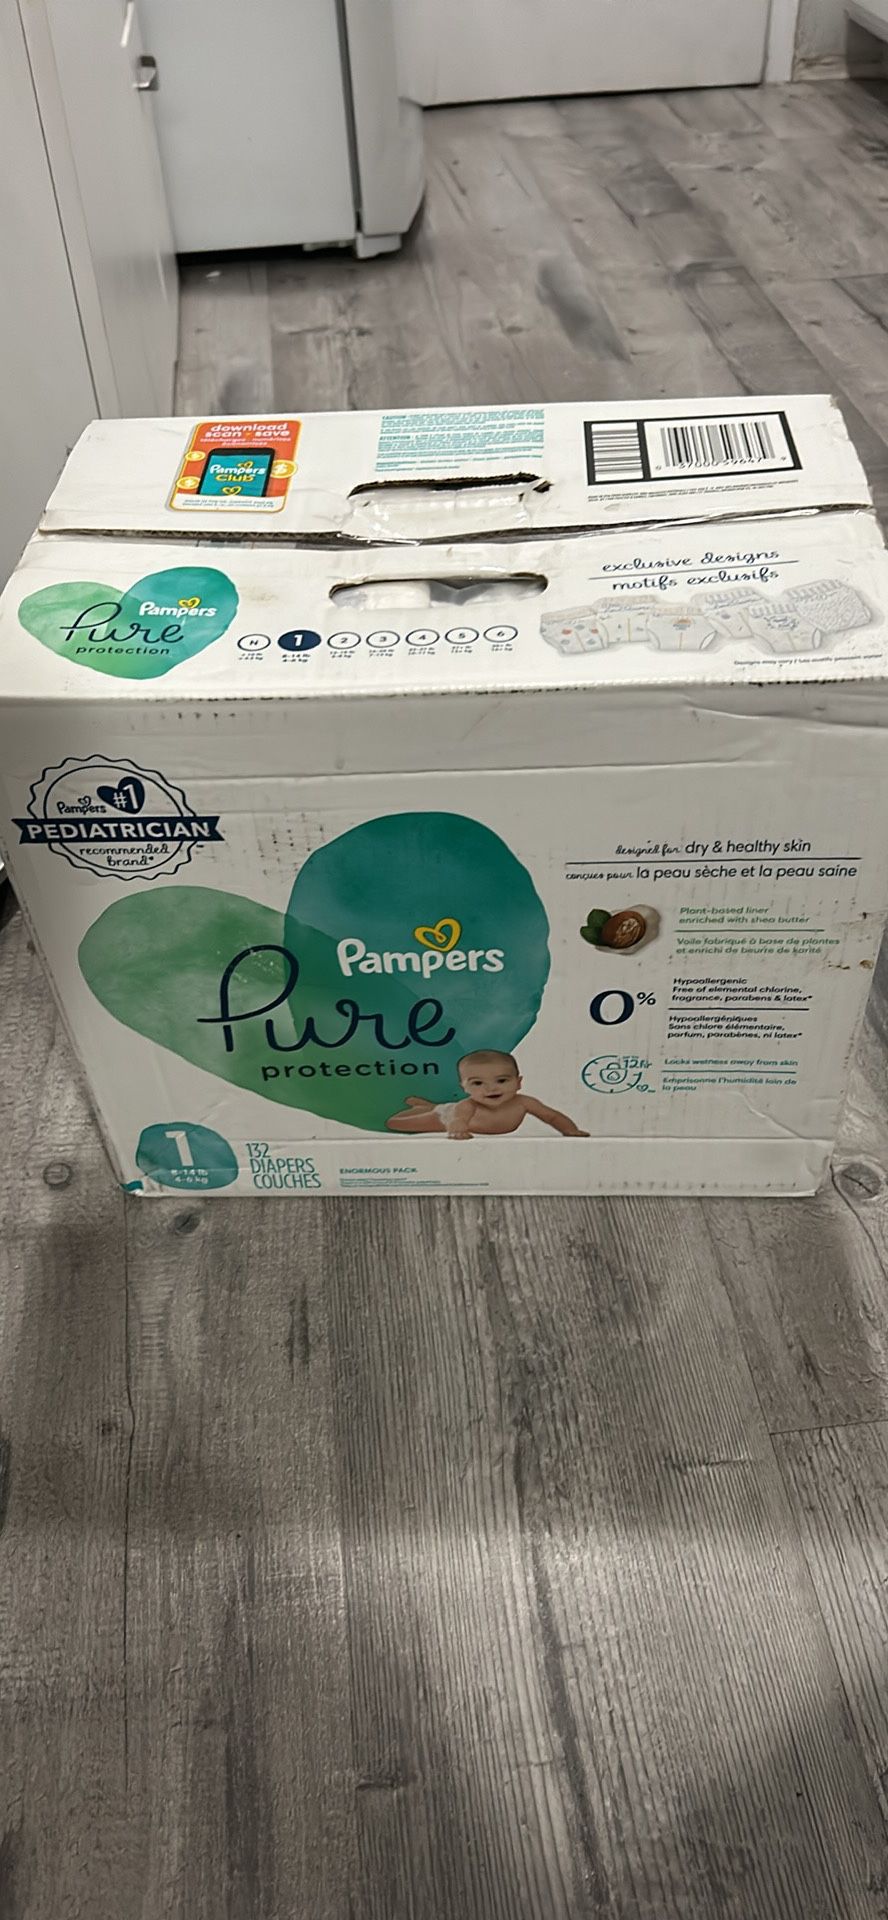 Pampers Pure Protection Diapers (132) Count